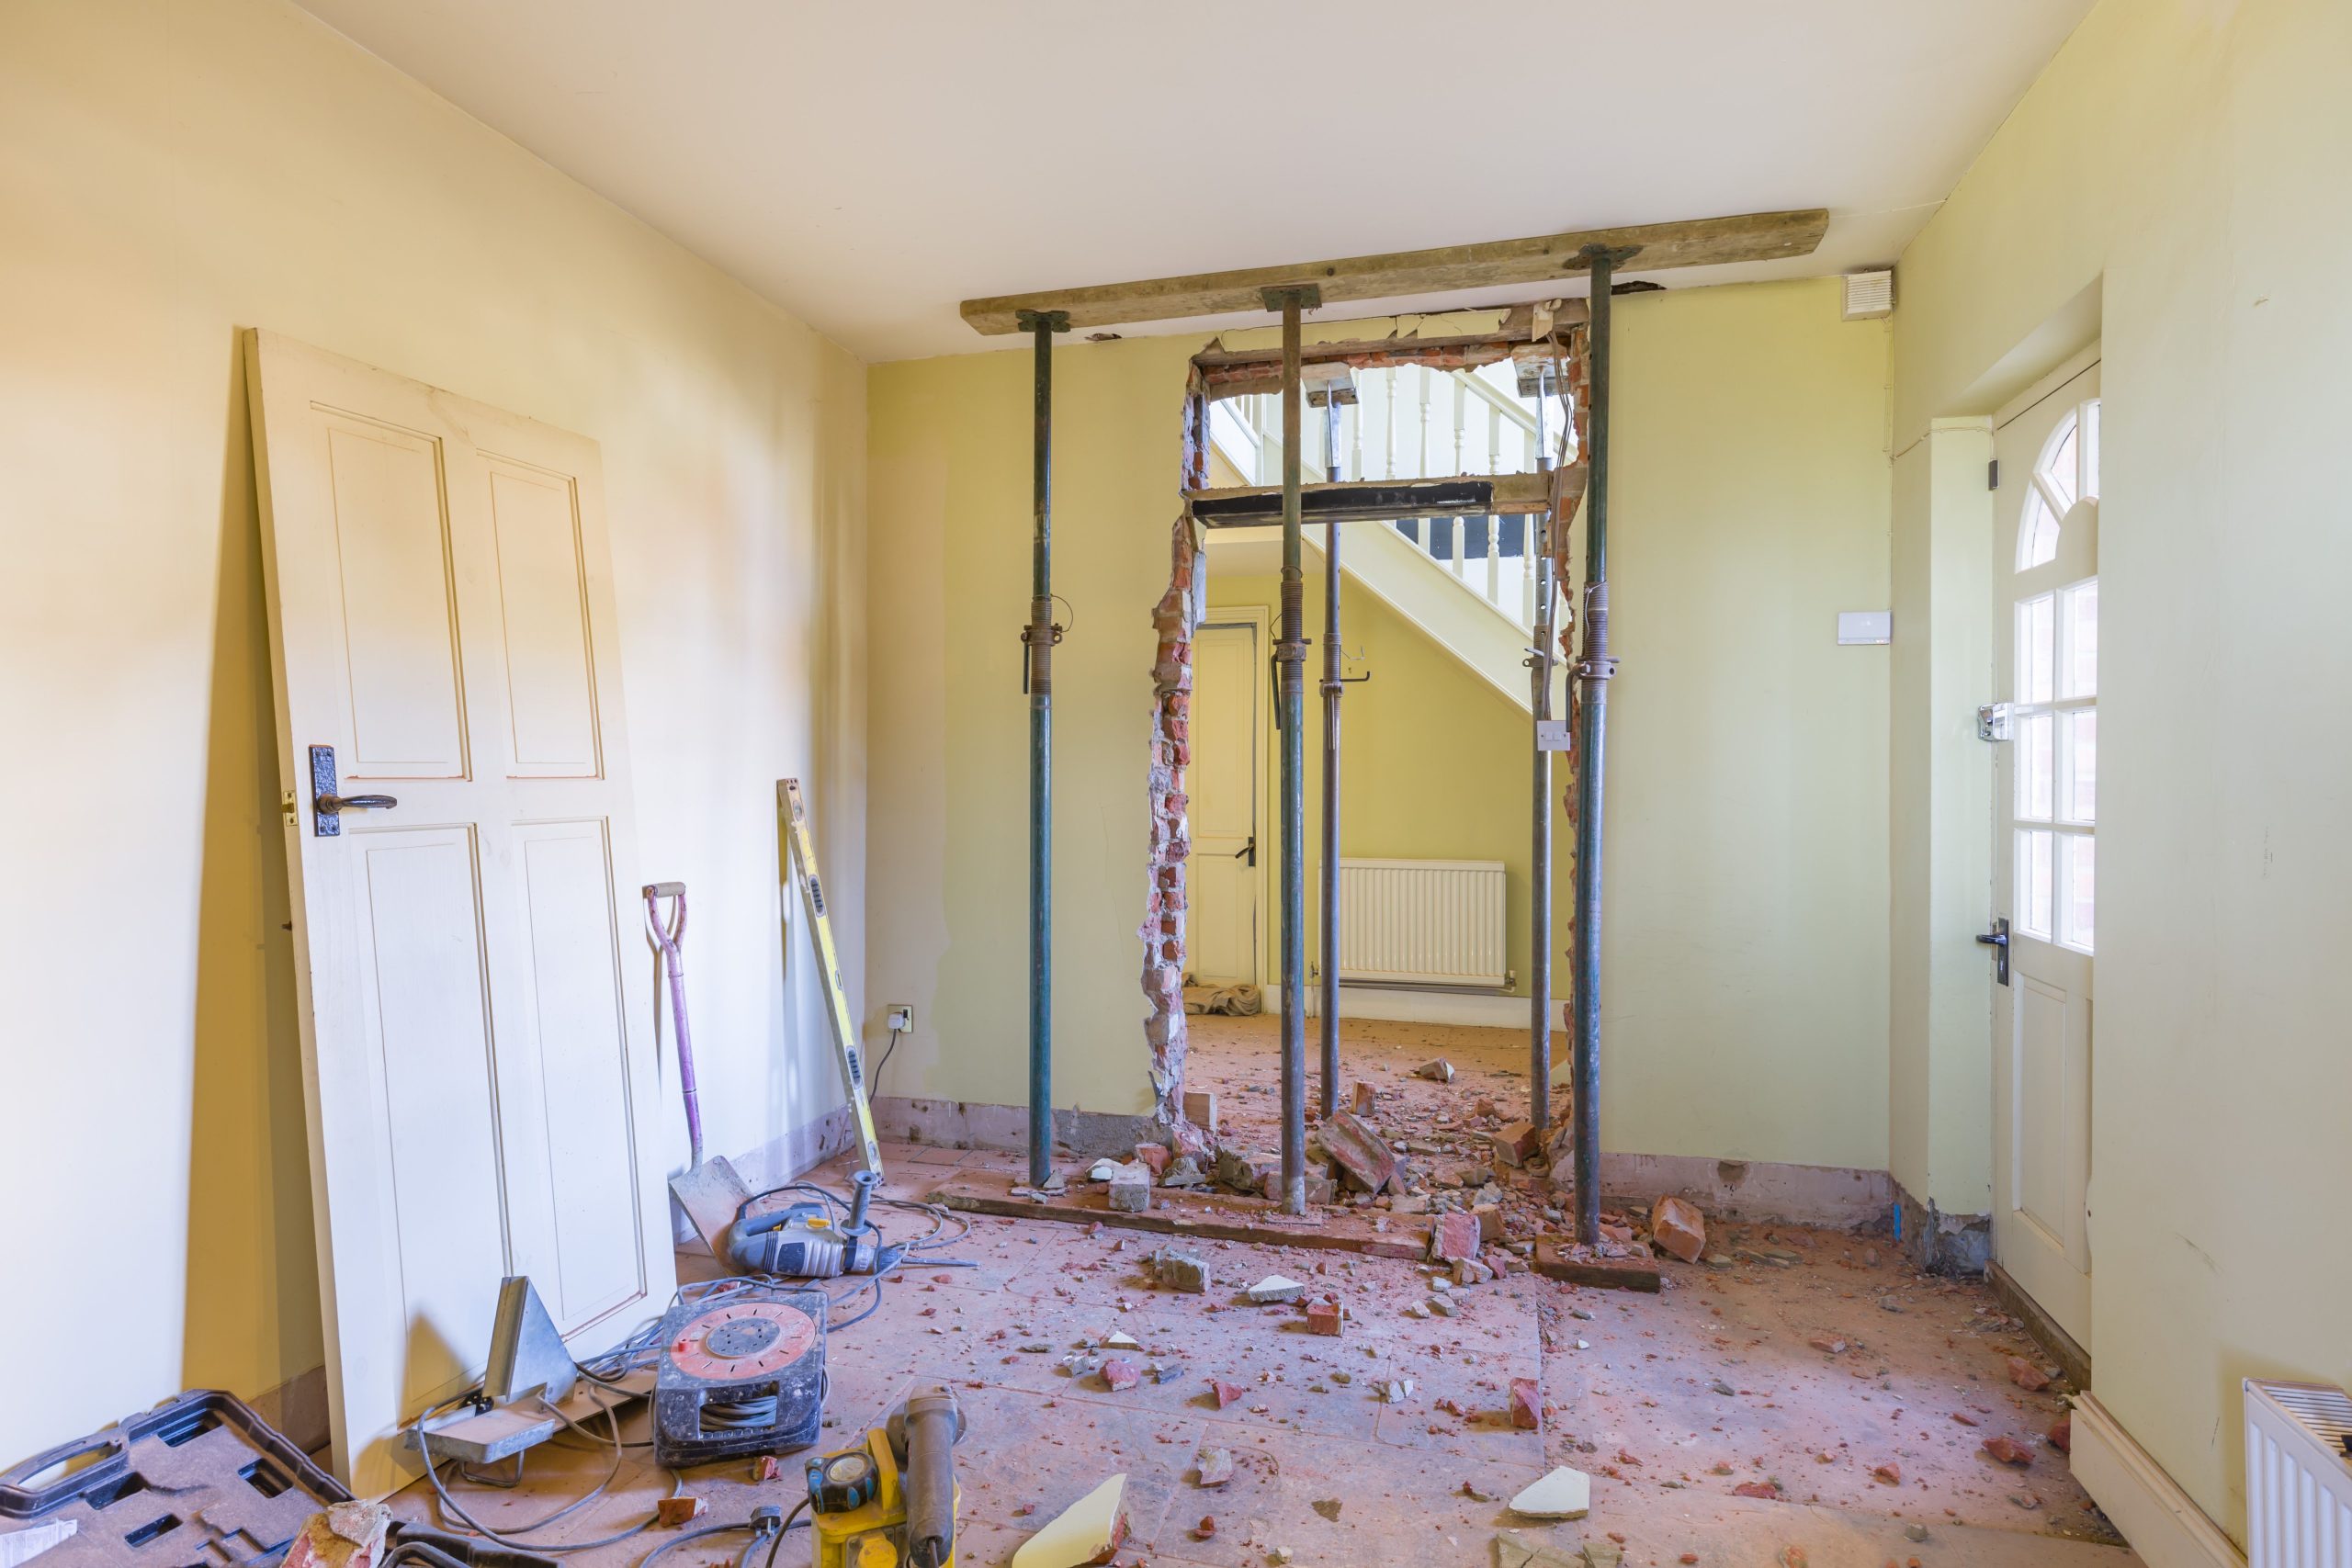 How much does it cost to remove a load bearing wall?